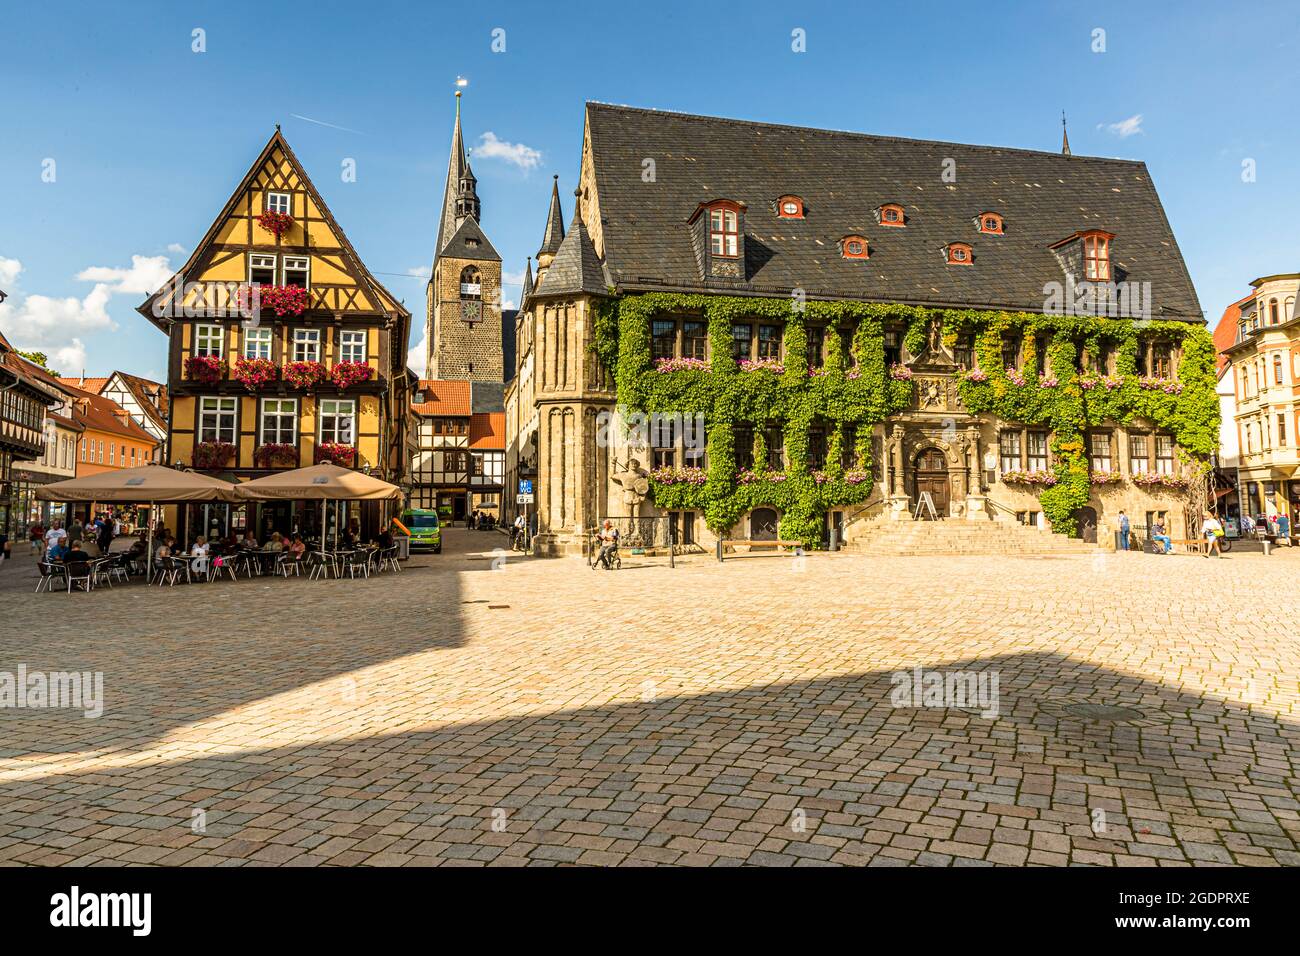 Market square with the town hall of Quedlinburg, Germany Stock Photo